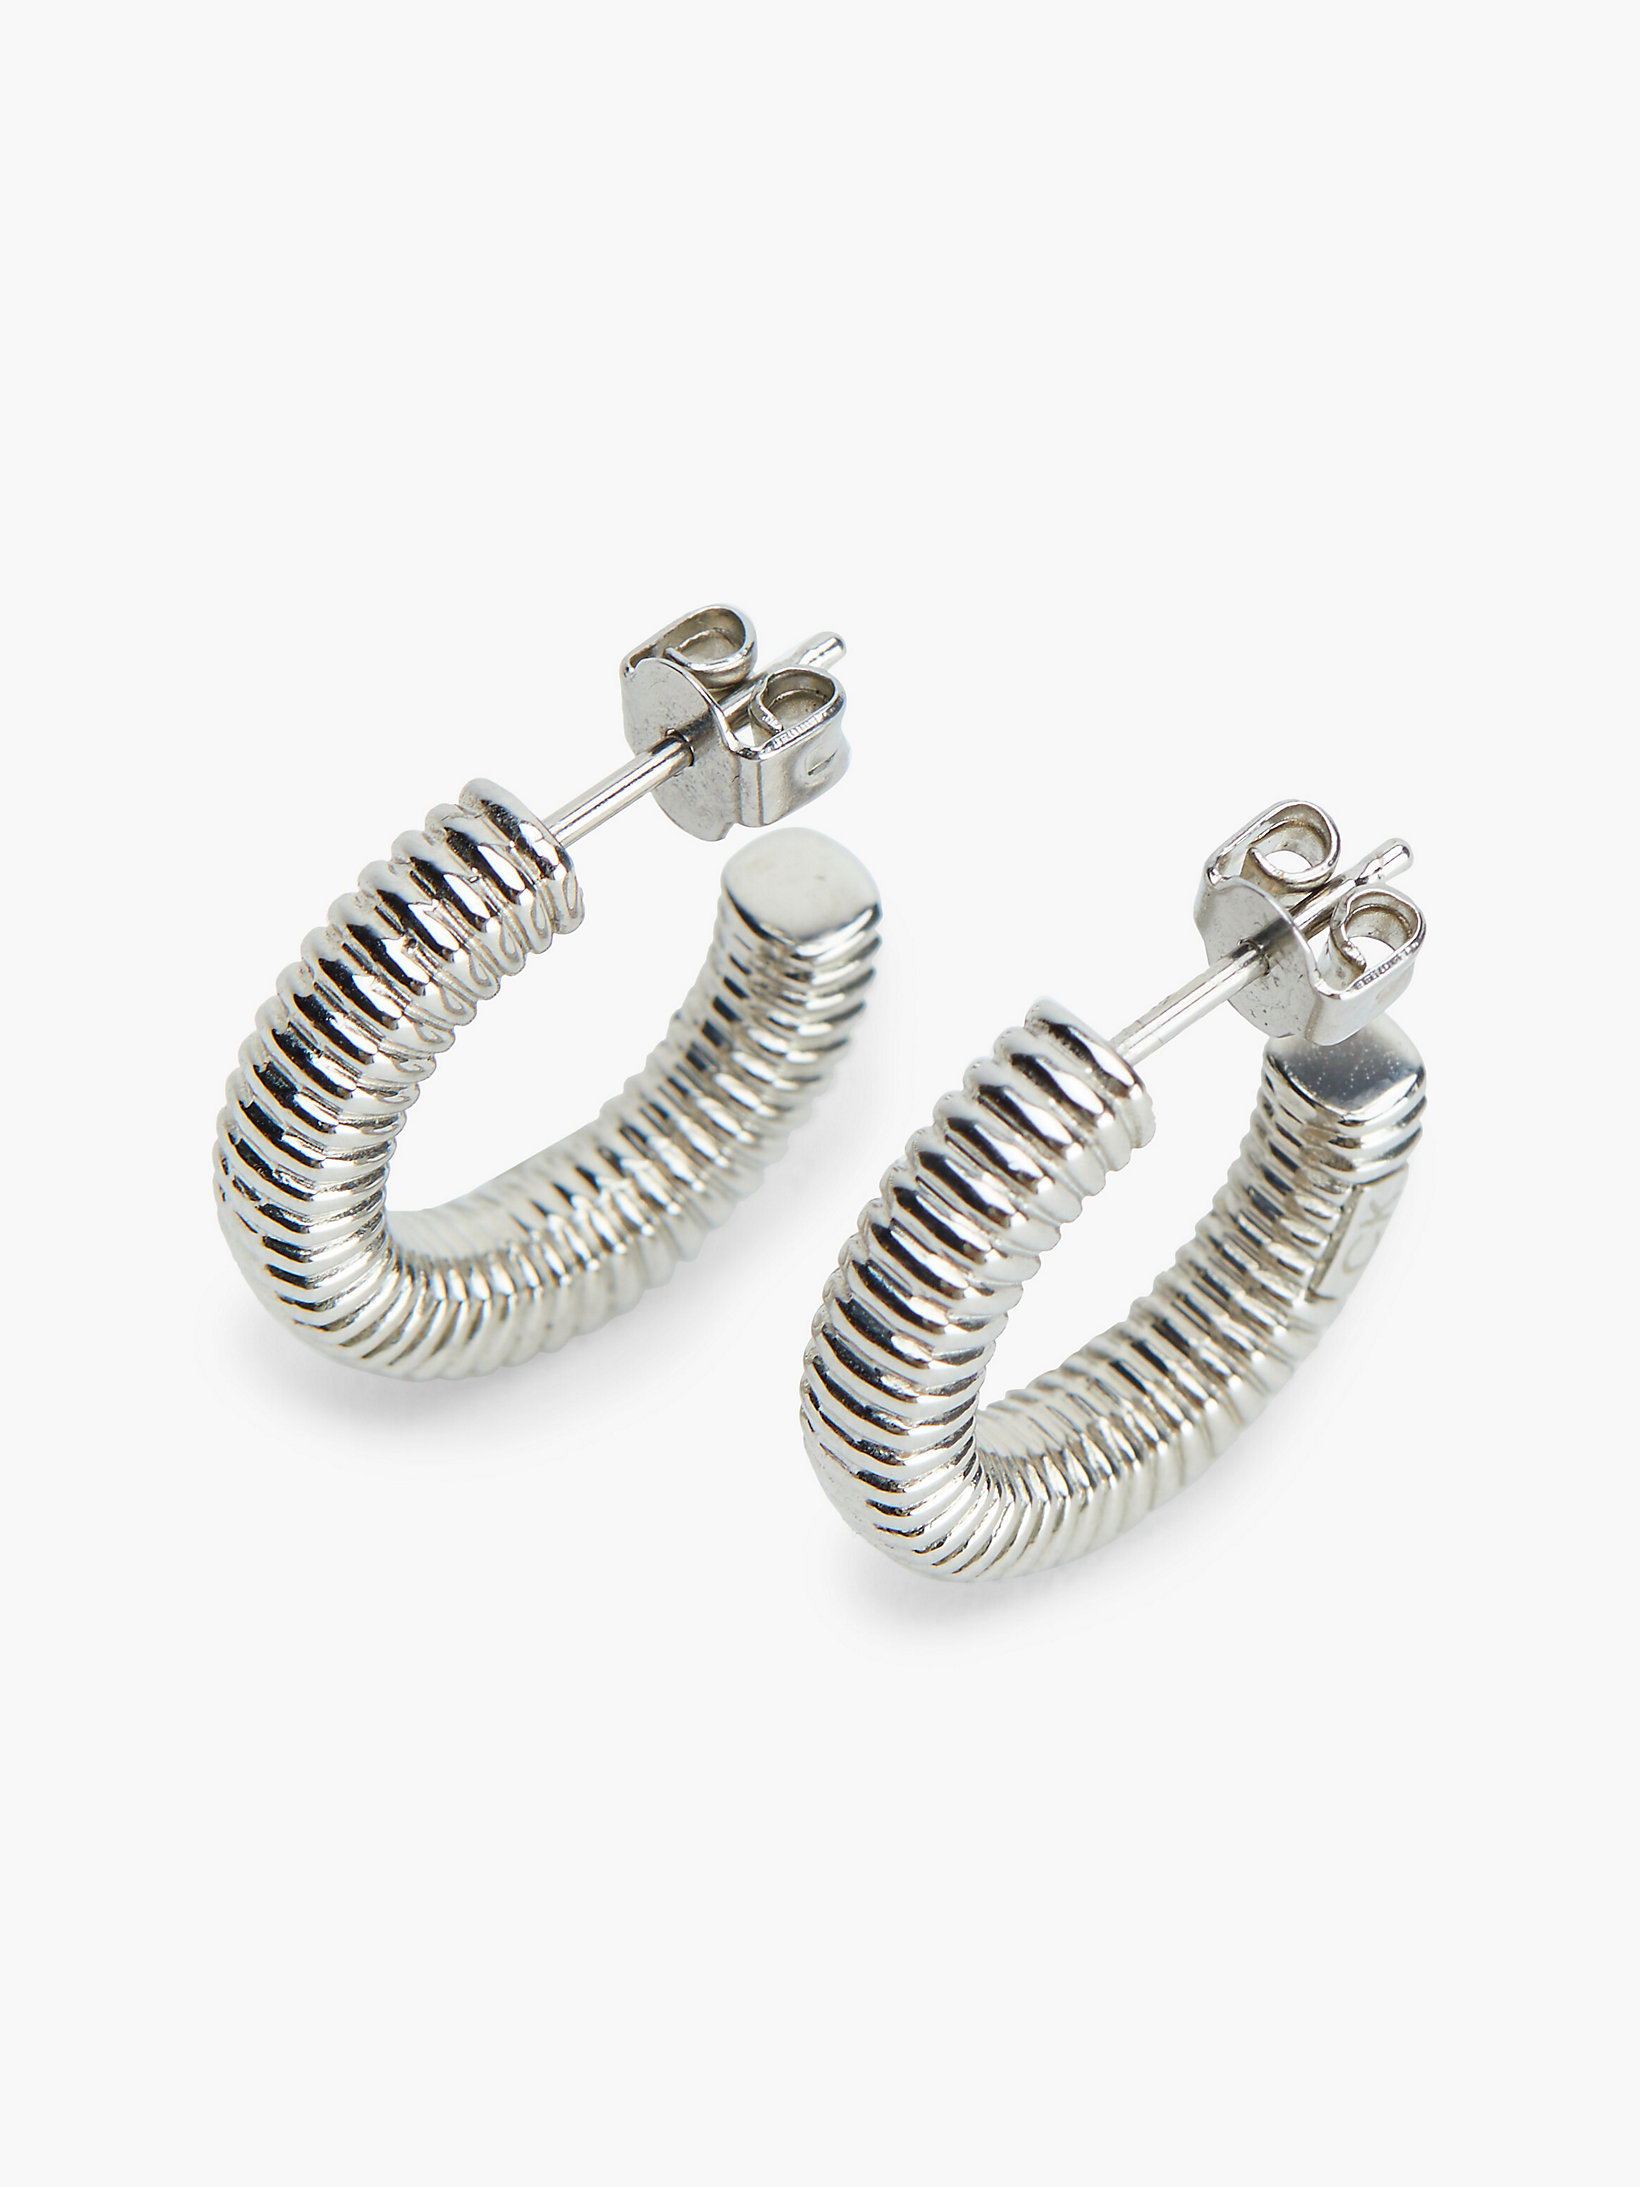 Silver Earrings - Playful Repetition undefined women Calvin Klein